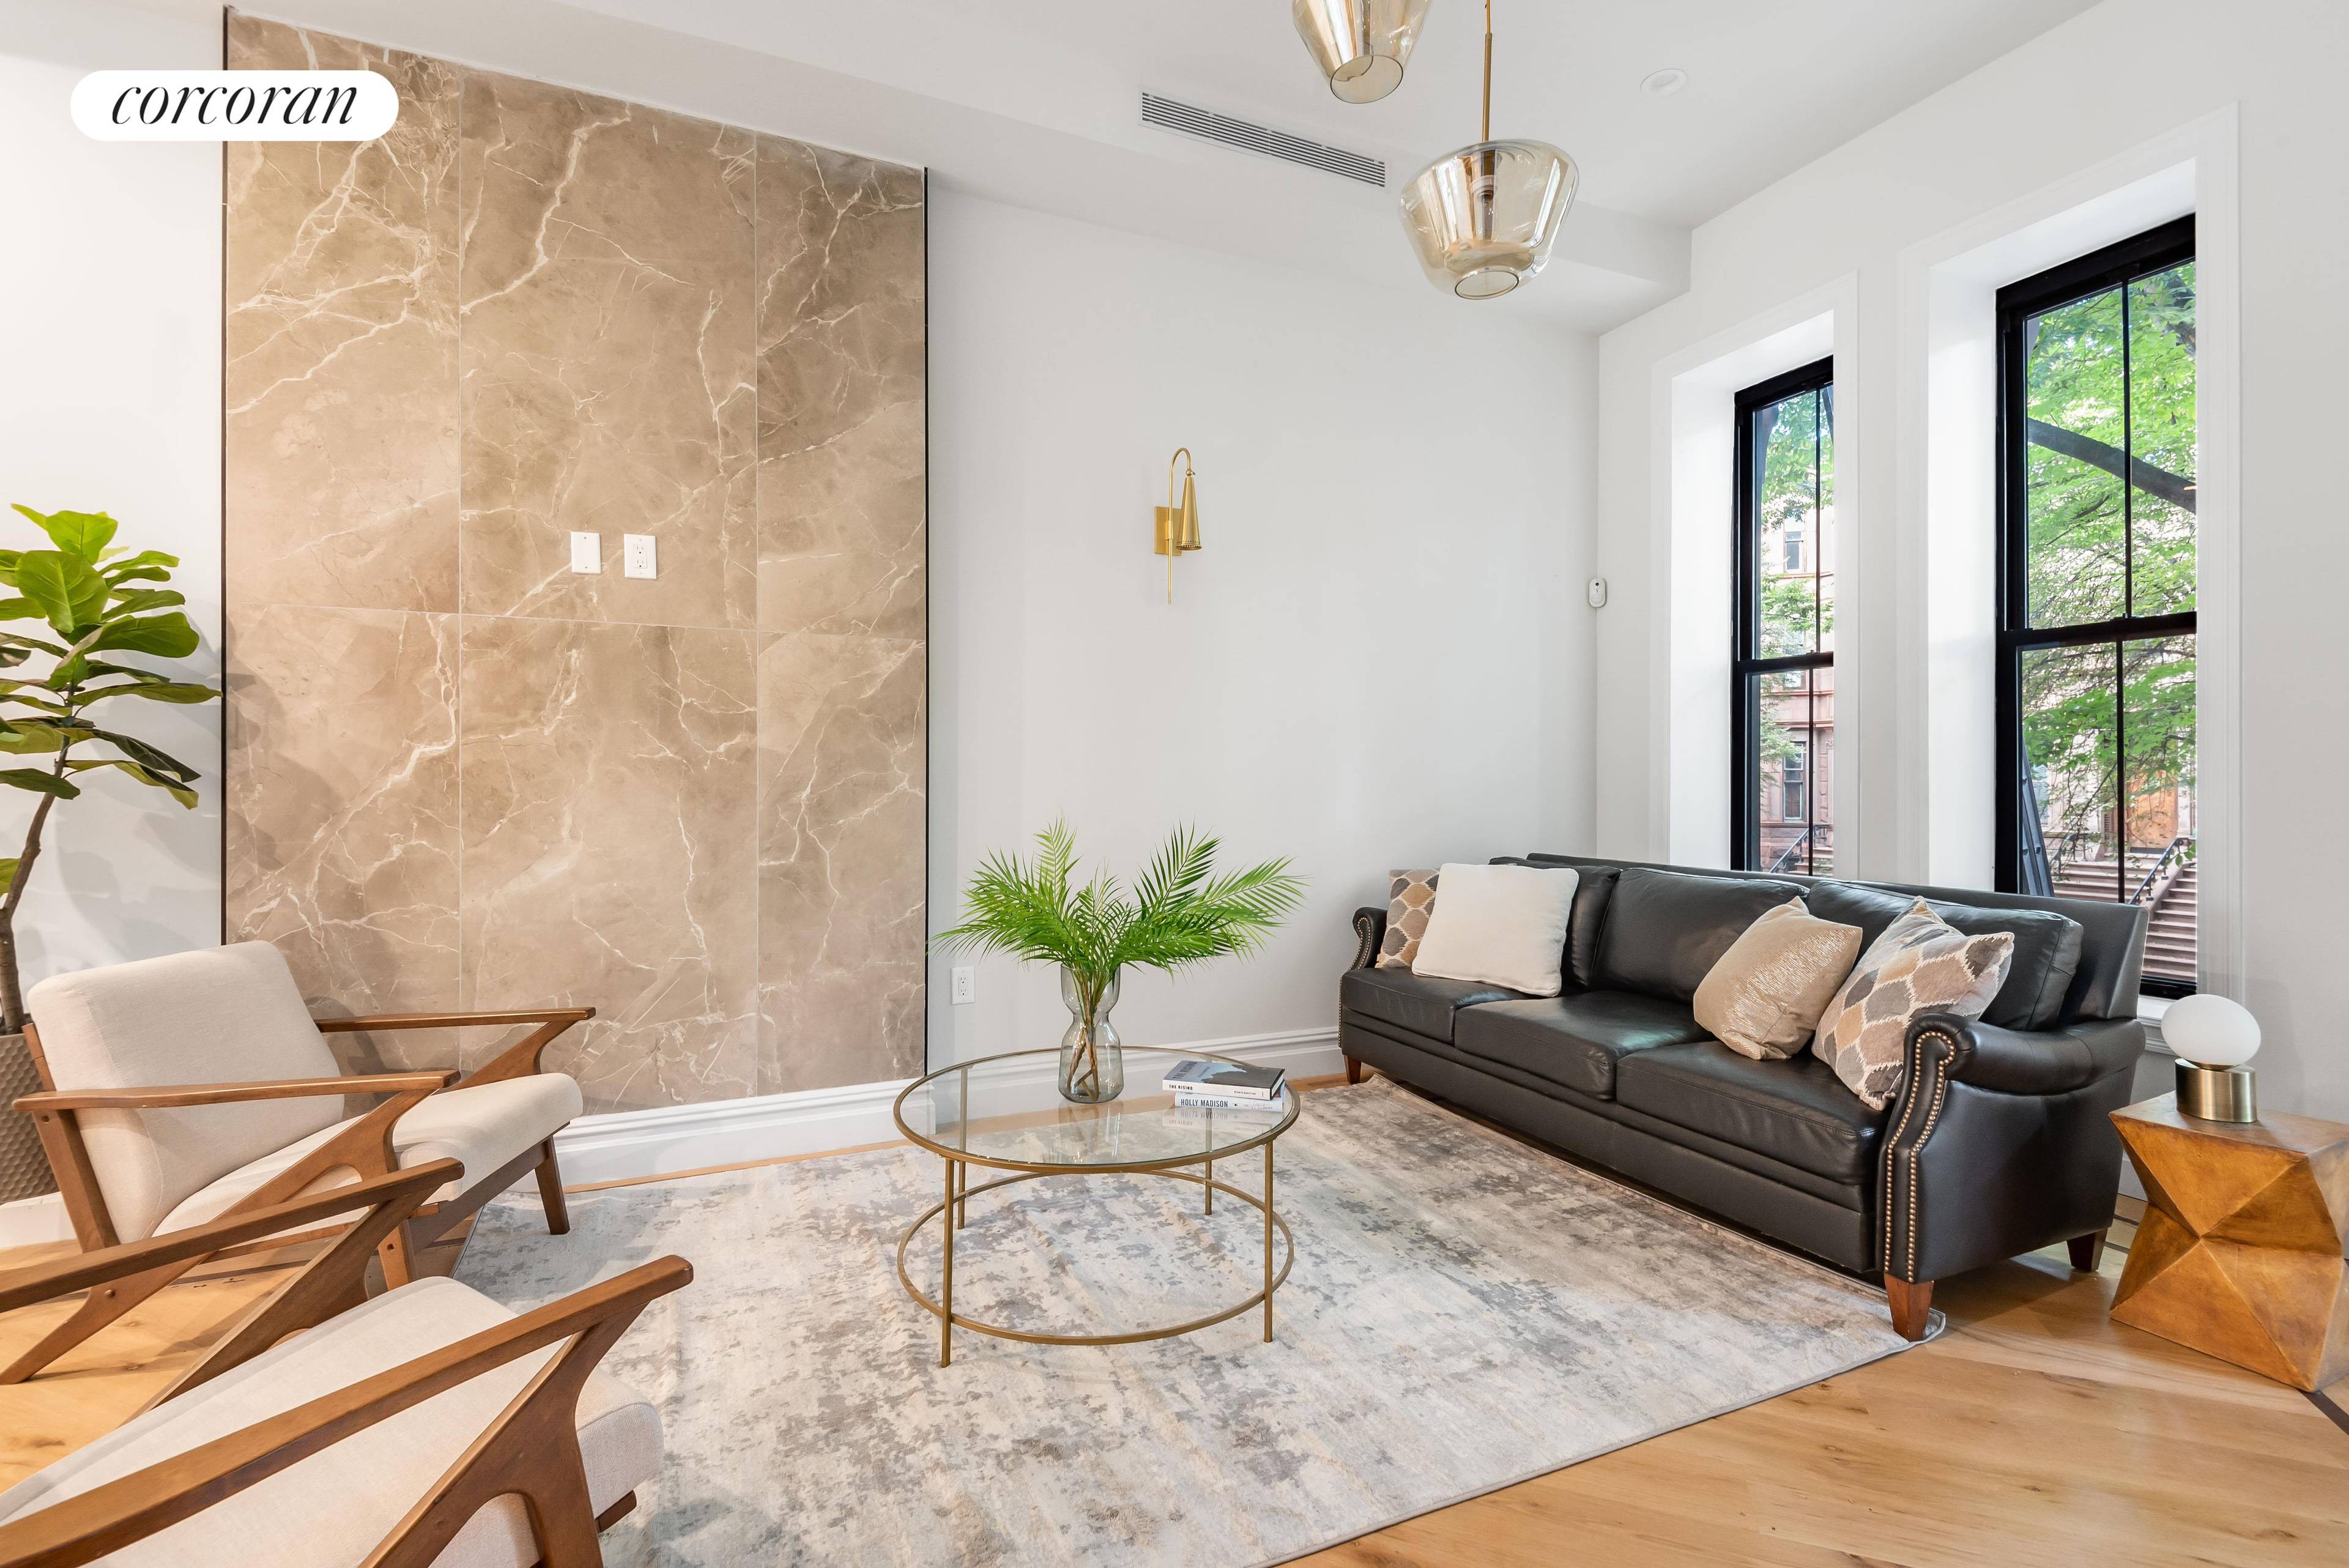 10 Arlington Place is a 4 story single family townhouse, tucked in a row of landmarked brownstones on a 1 block stretch that is sequestered between Macon St and Halsey ...